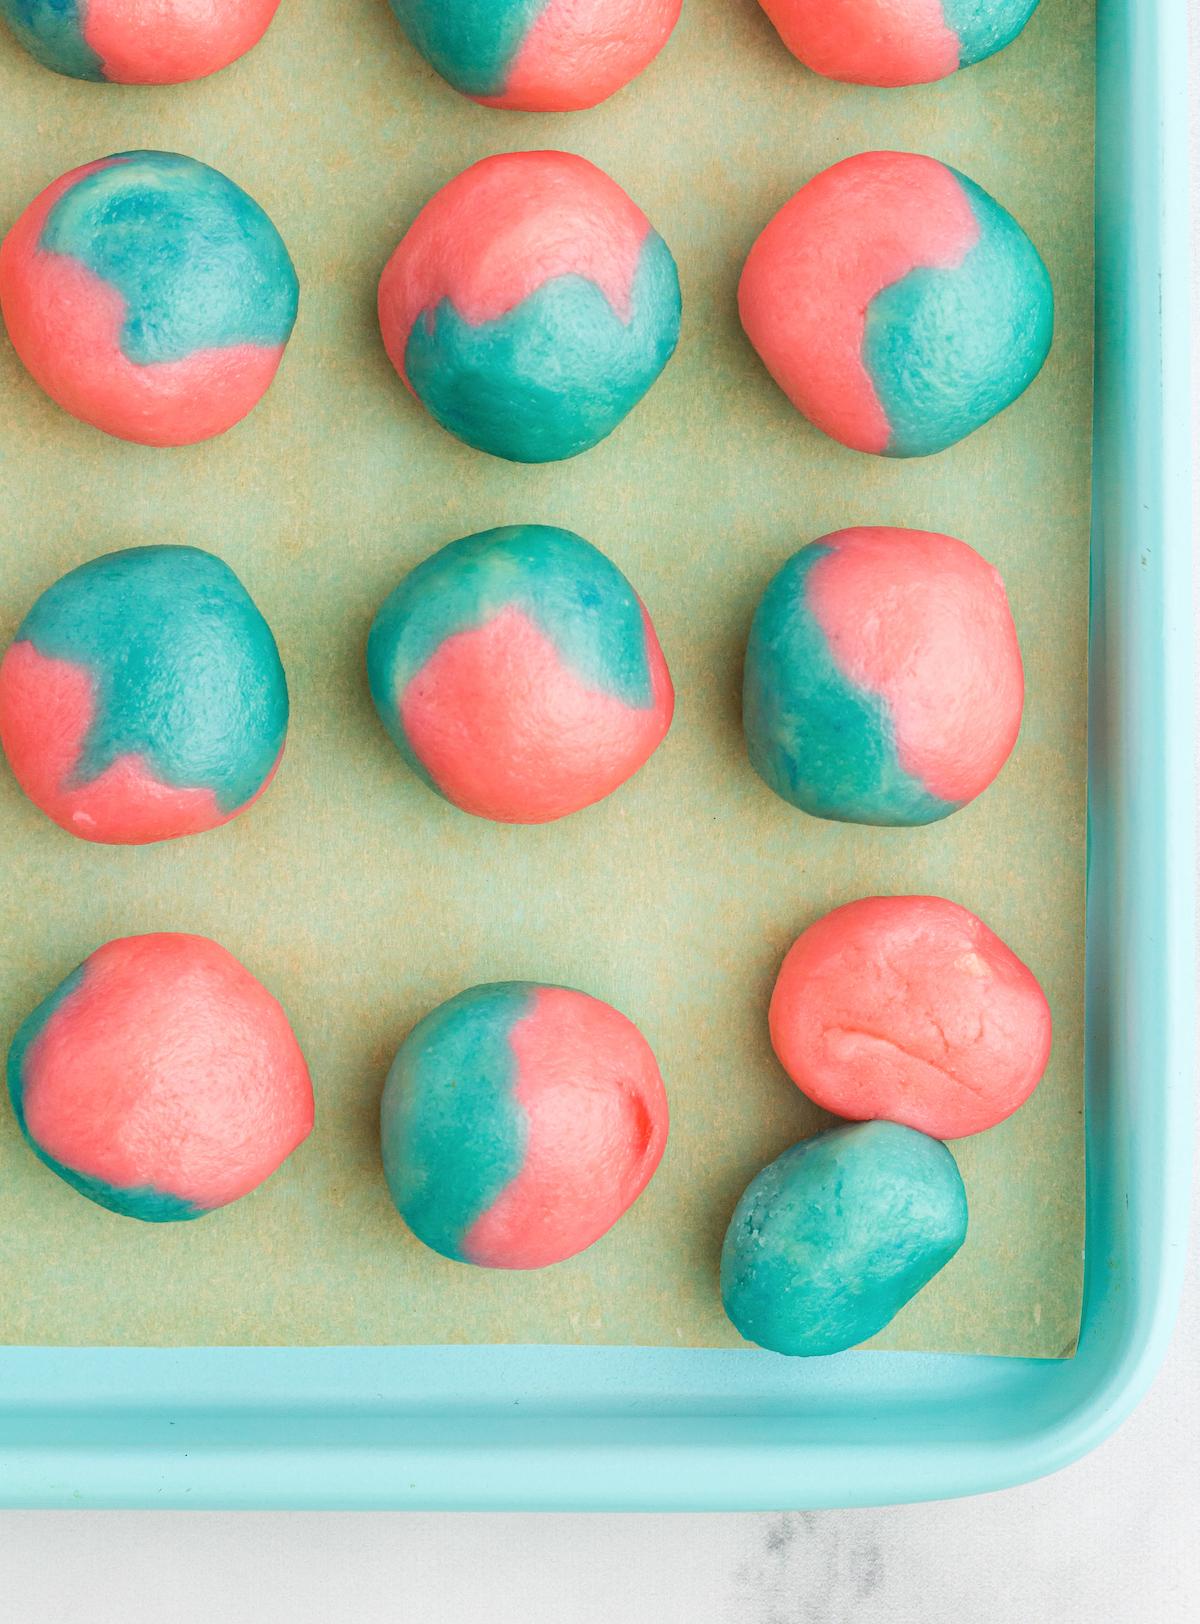 Forming the pink and blue dough into balls